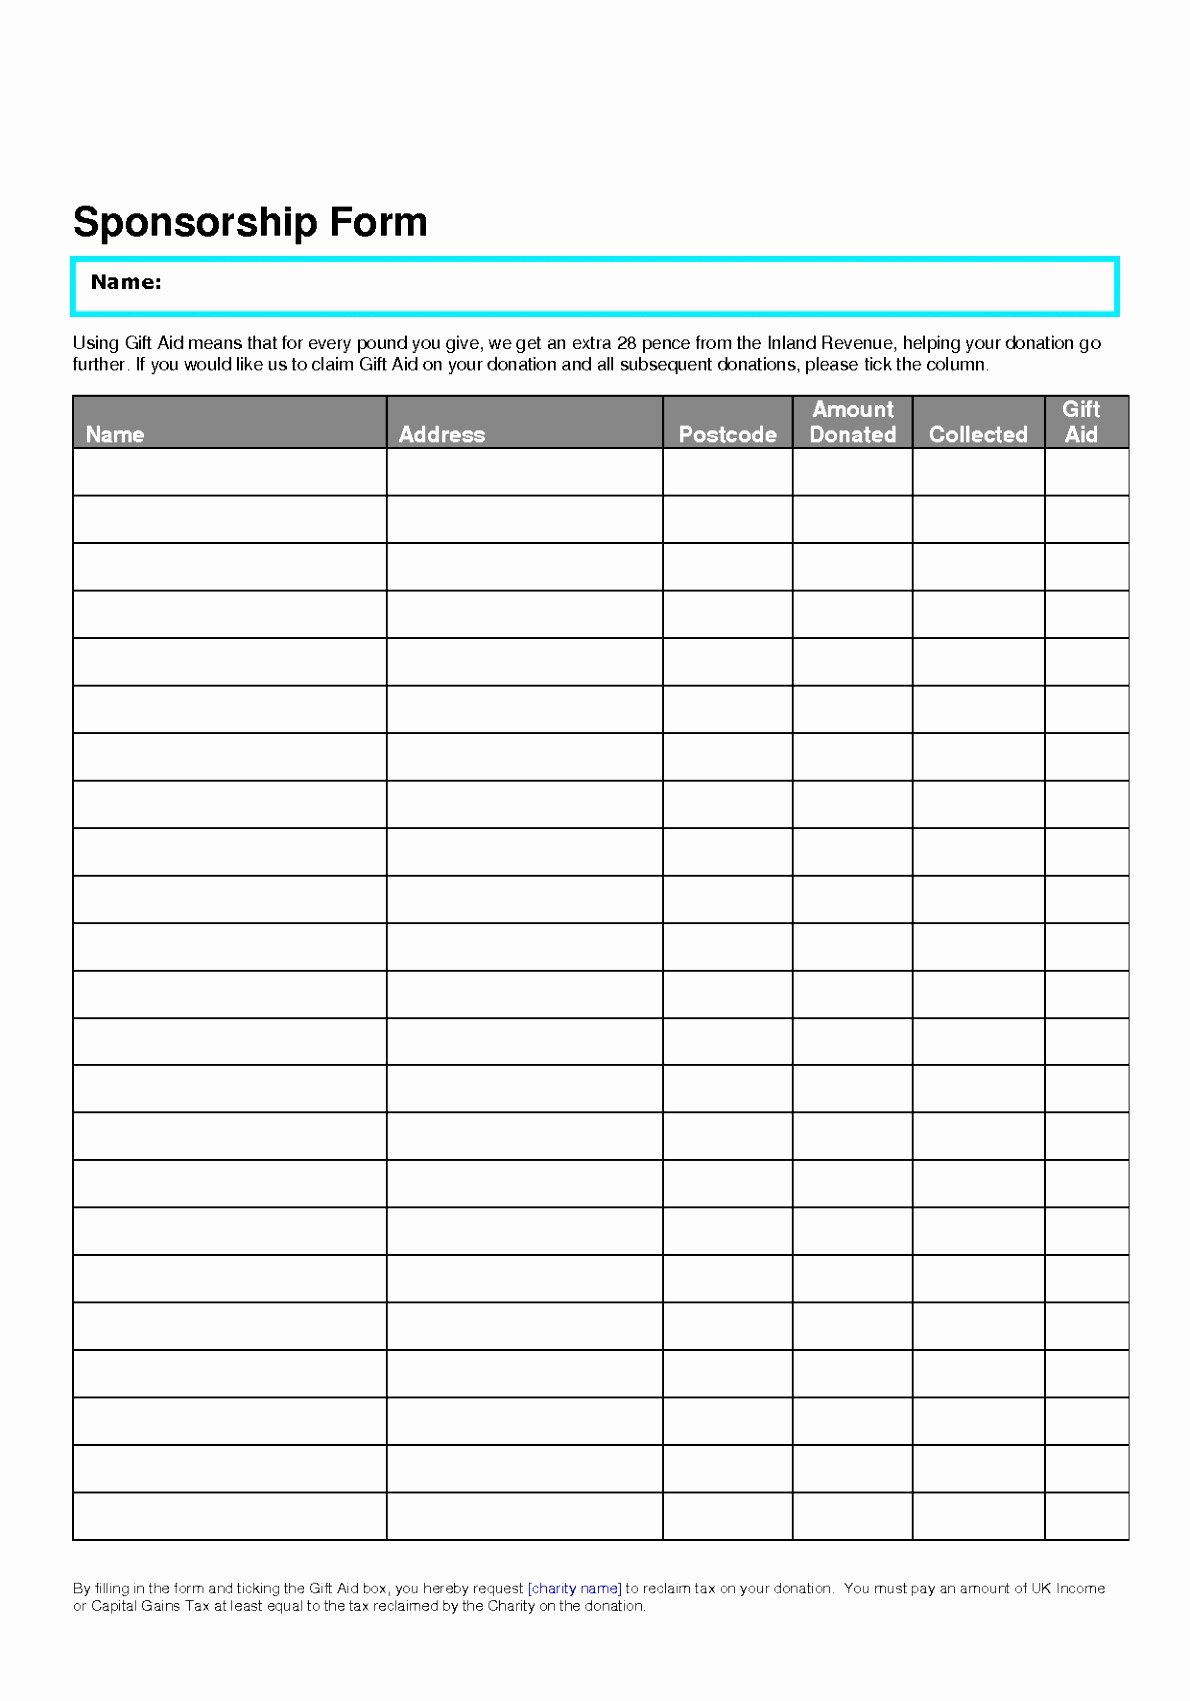 Fundraiser form Template Free Inspirational 5 Fundraiser Pledge form Template Pttyt Templatesz234